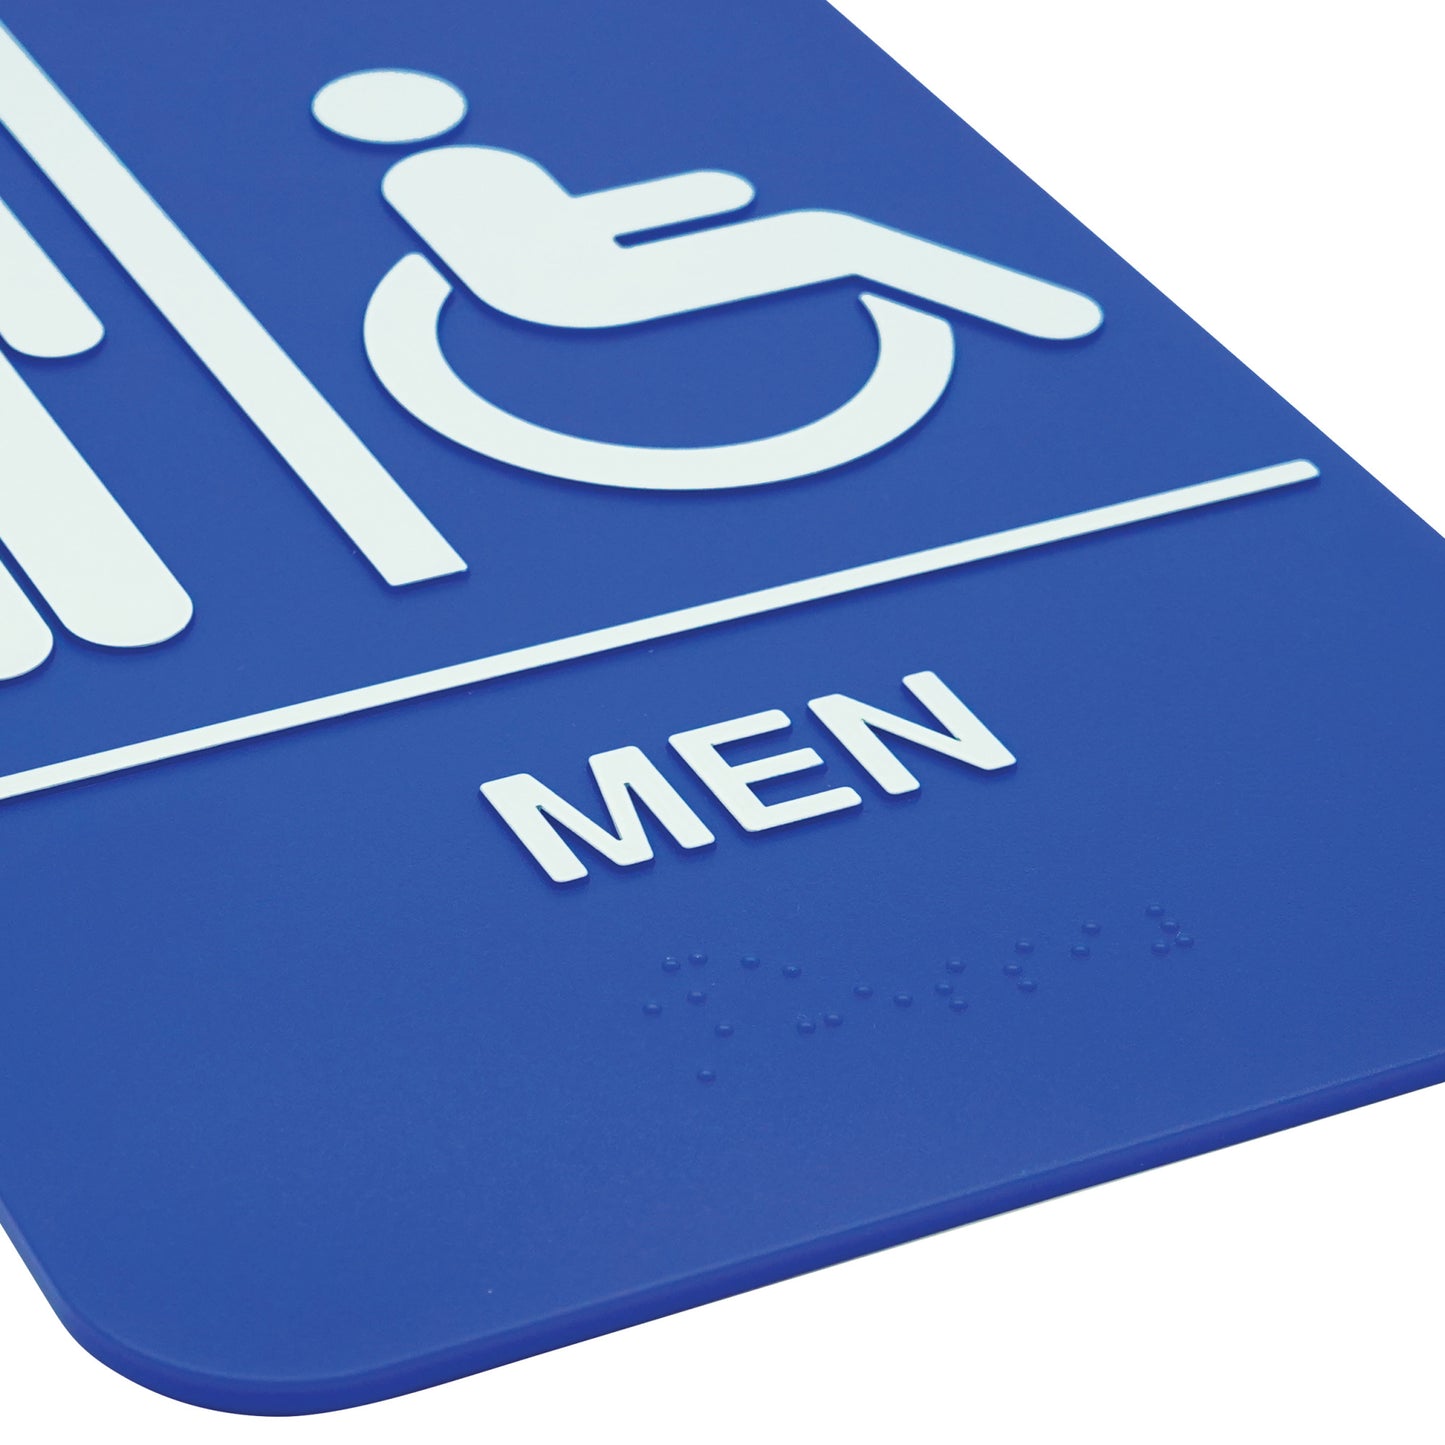 SGNB-652B - Information Signs with Braille, 6"W x 9"H - Men/Accessible